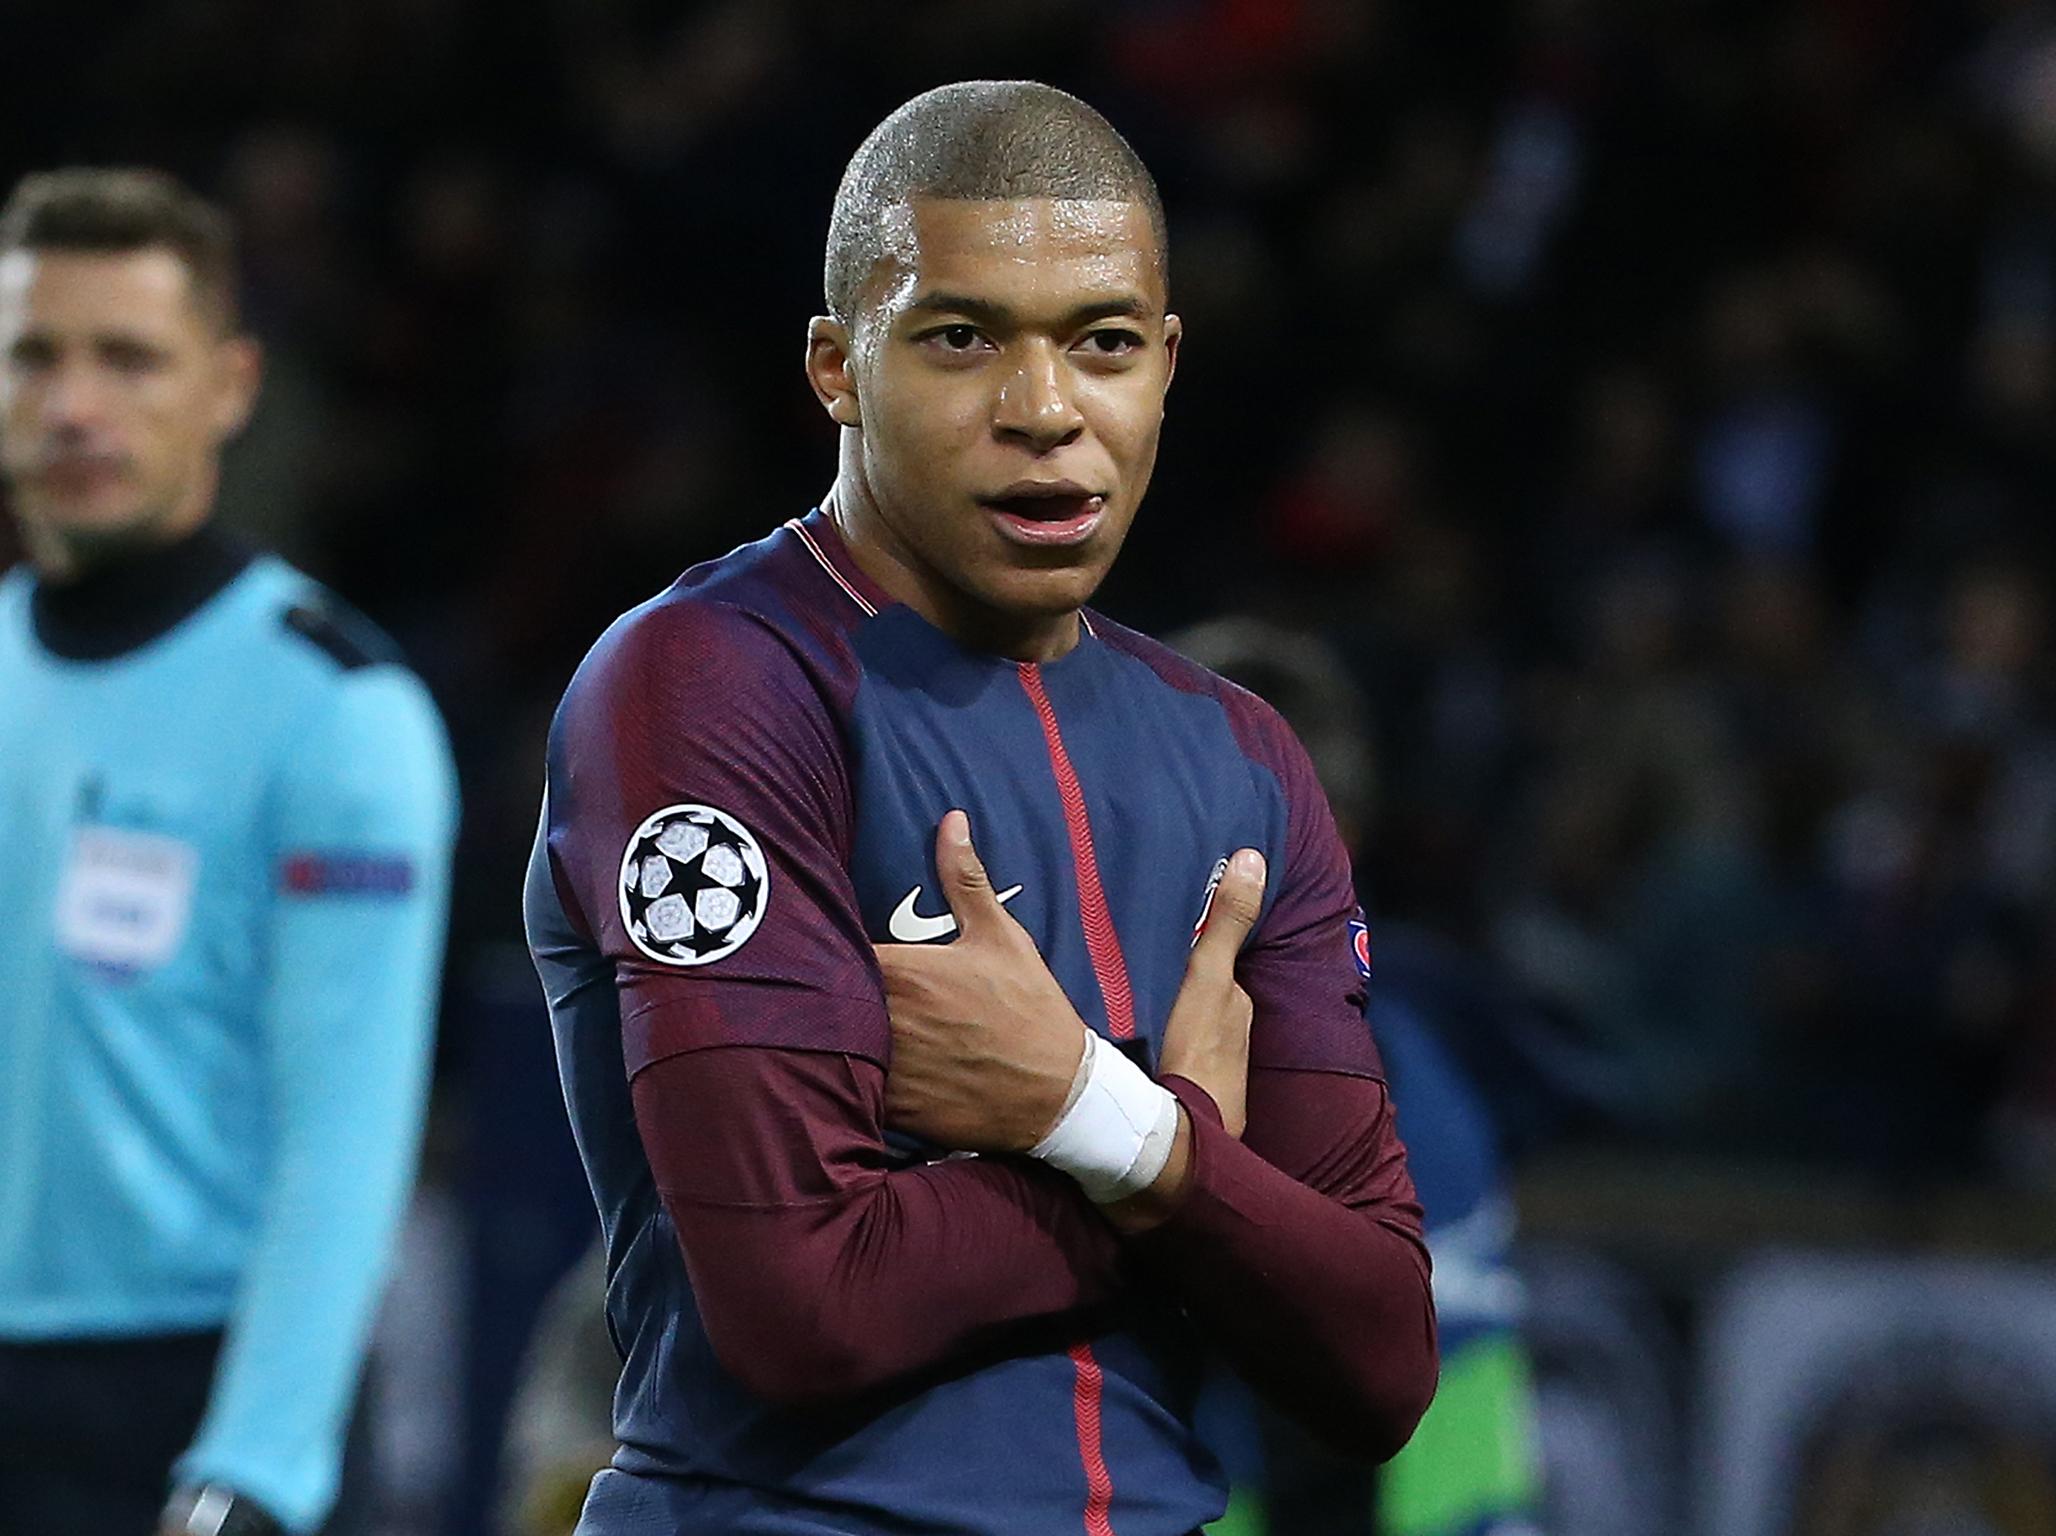 Mbappe is on loan at PSG before a permanent move in the summer